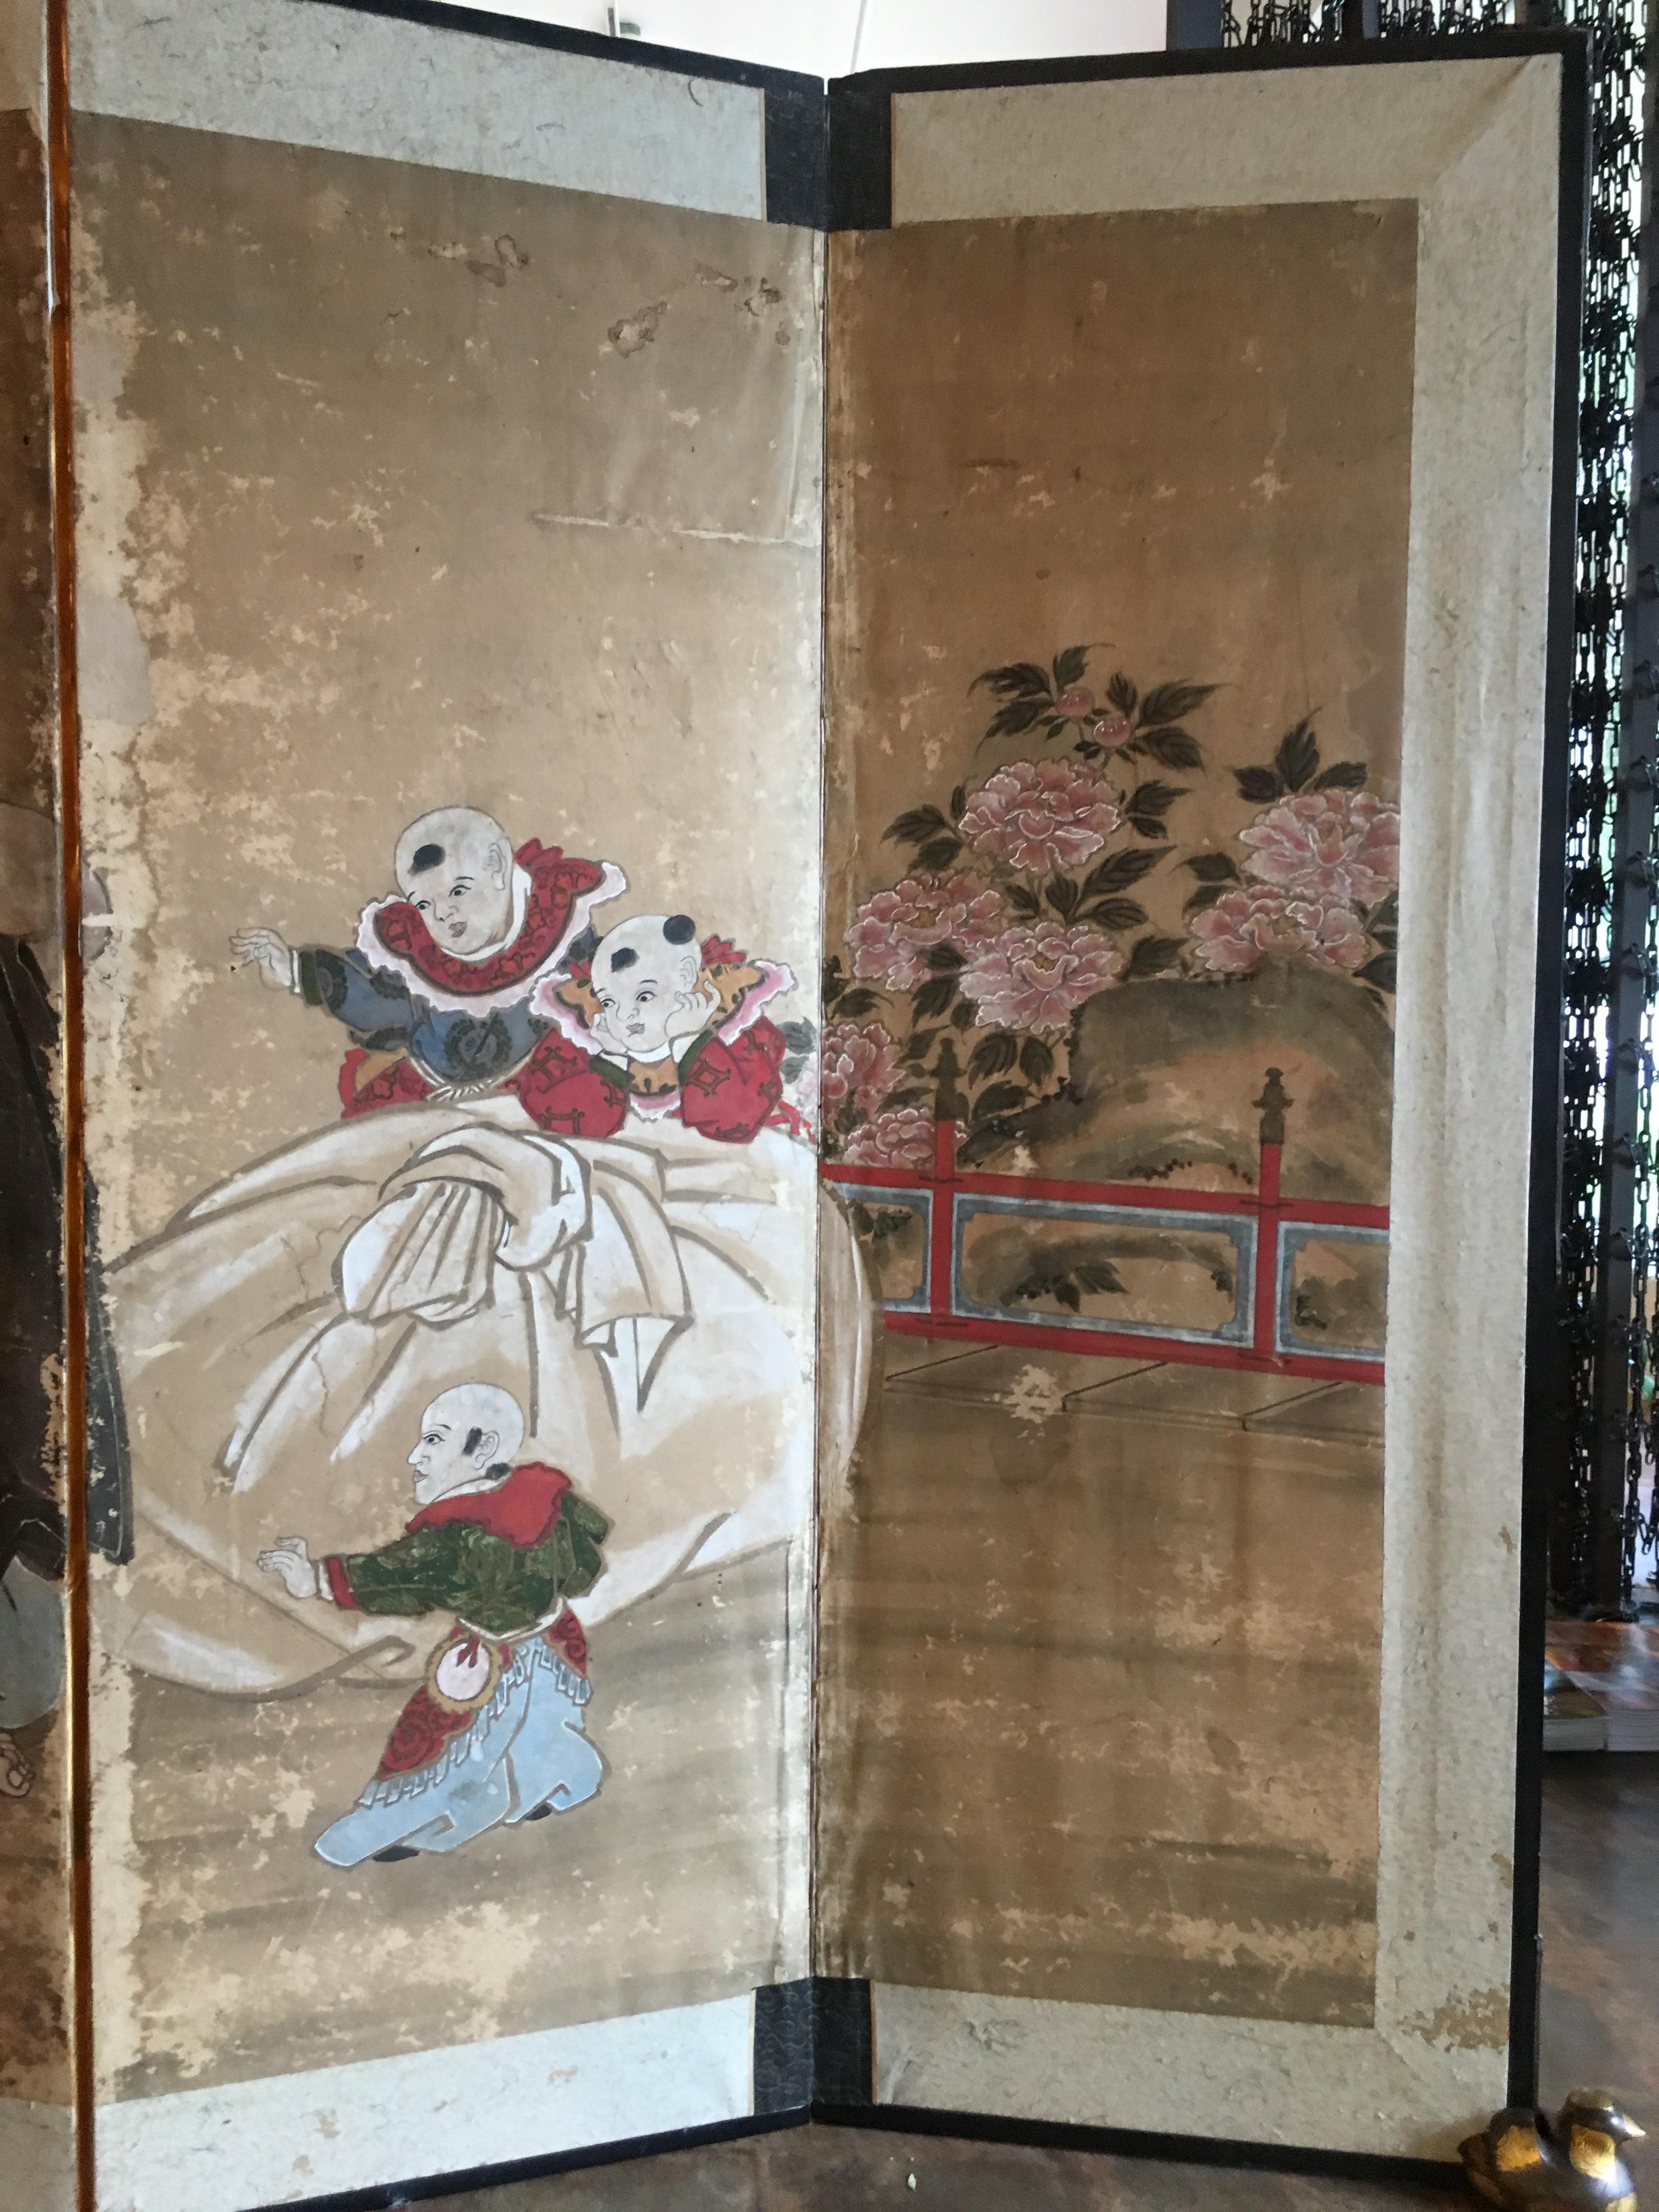 A delightful Japanese six panel painted paper screen featuring the beloved figure Hotei, Edo Period, early 19th century. 

Hotei, called Budai in China, and known as the Laughing Buddha or Fat Buddha in the West, is considered to be an emanation